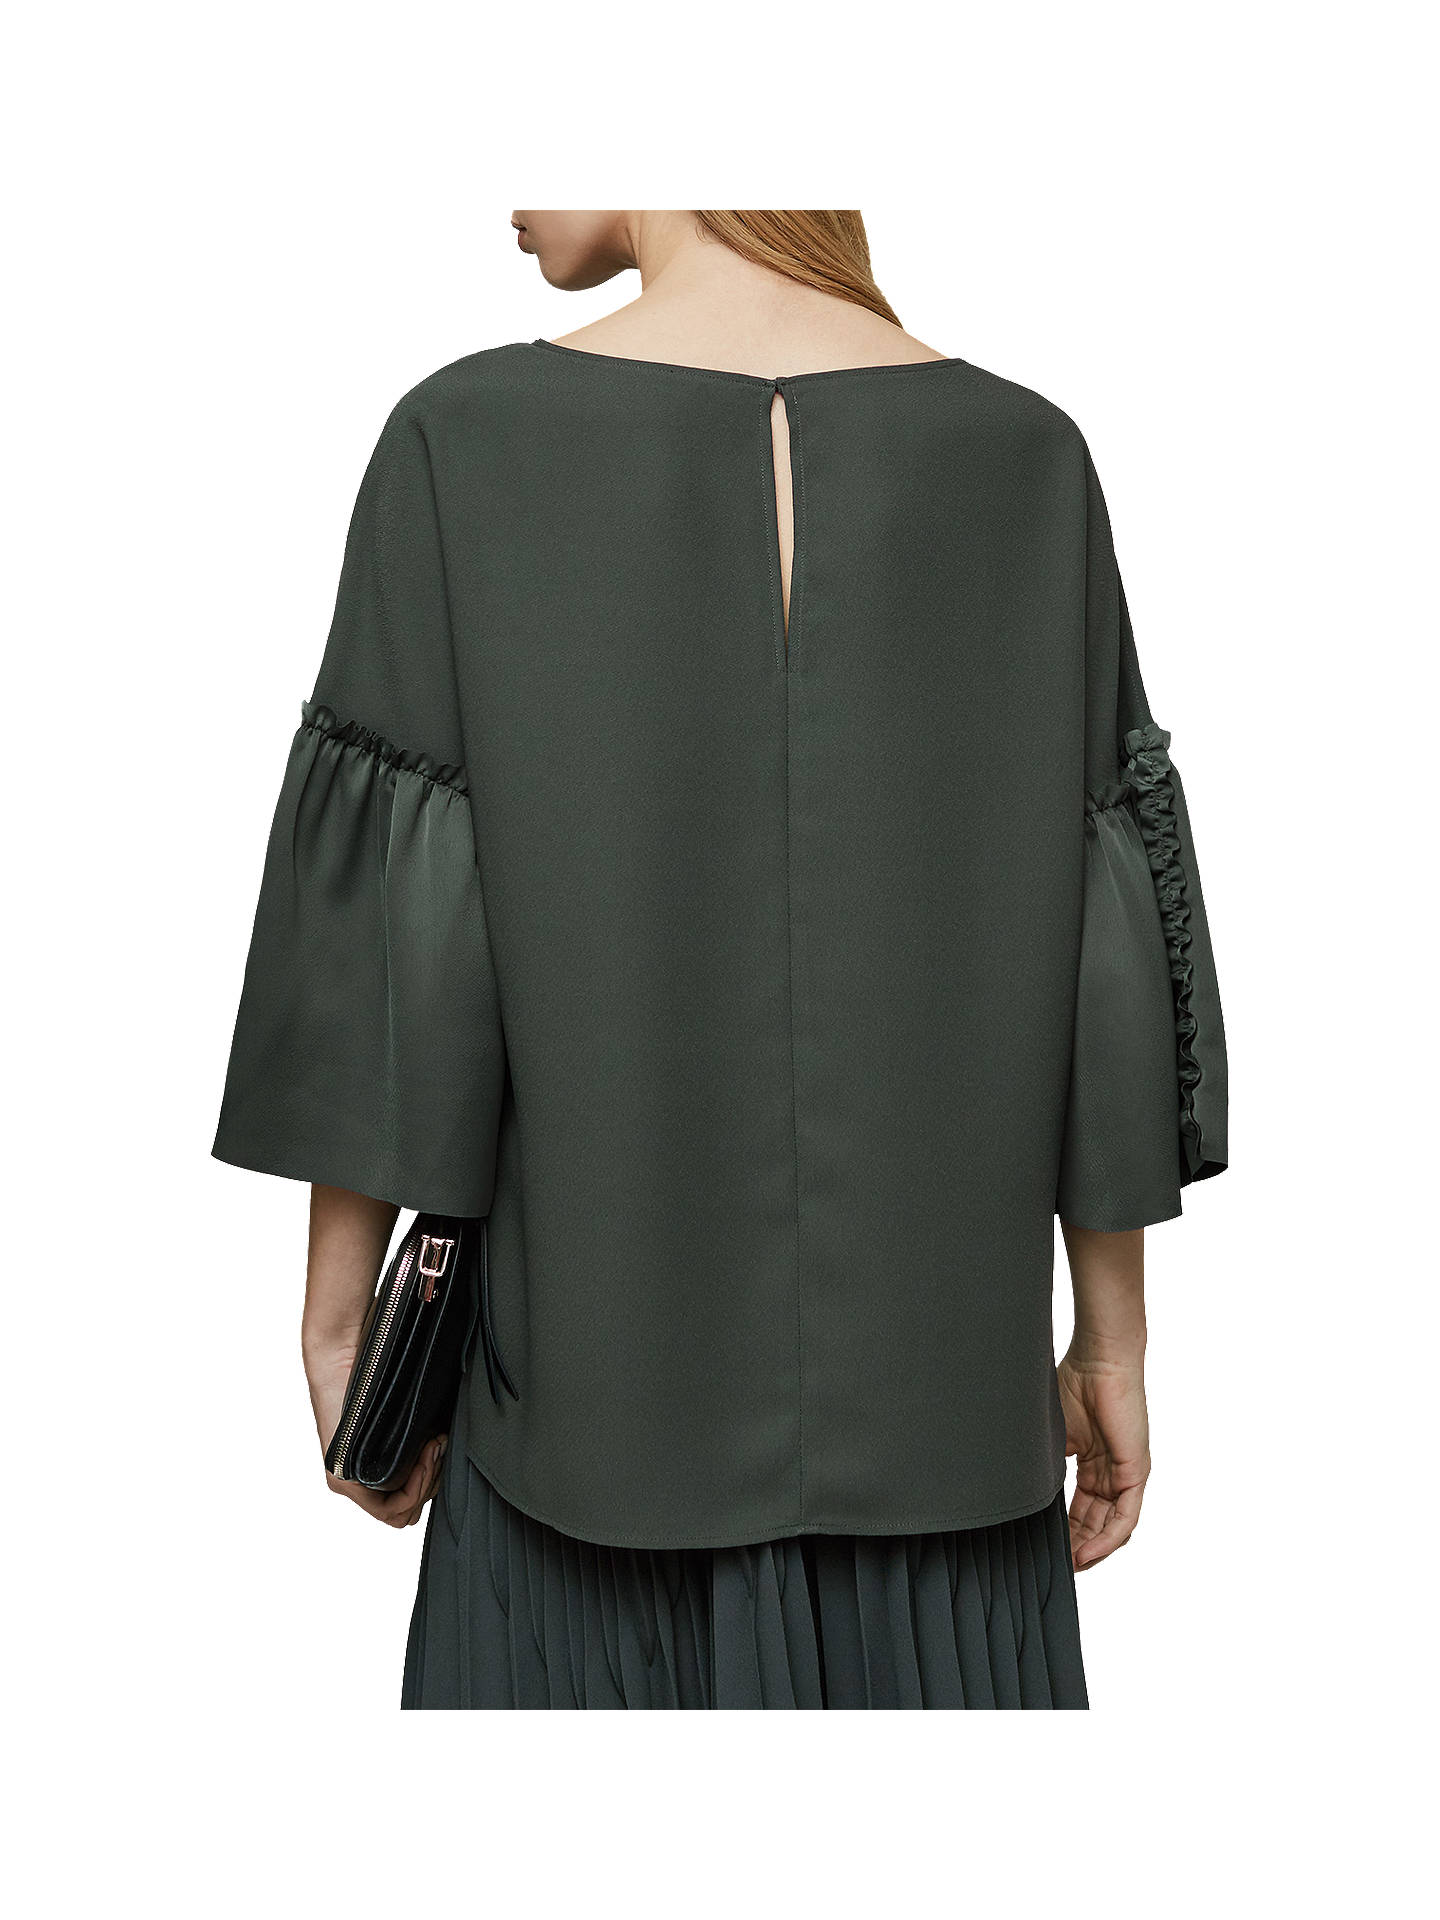 Reiss Joss Ruched Sleeve Detail Top at John Lewis & Partners